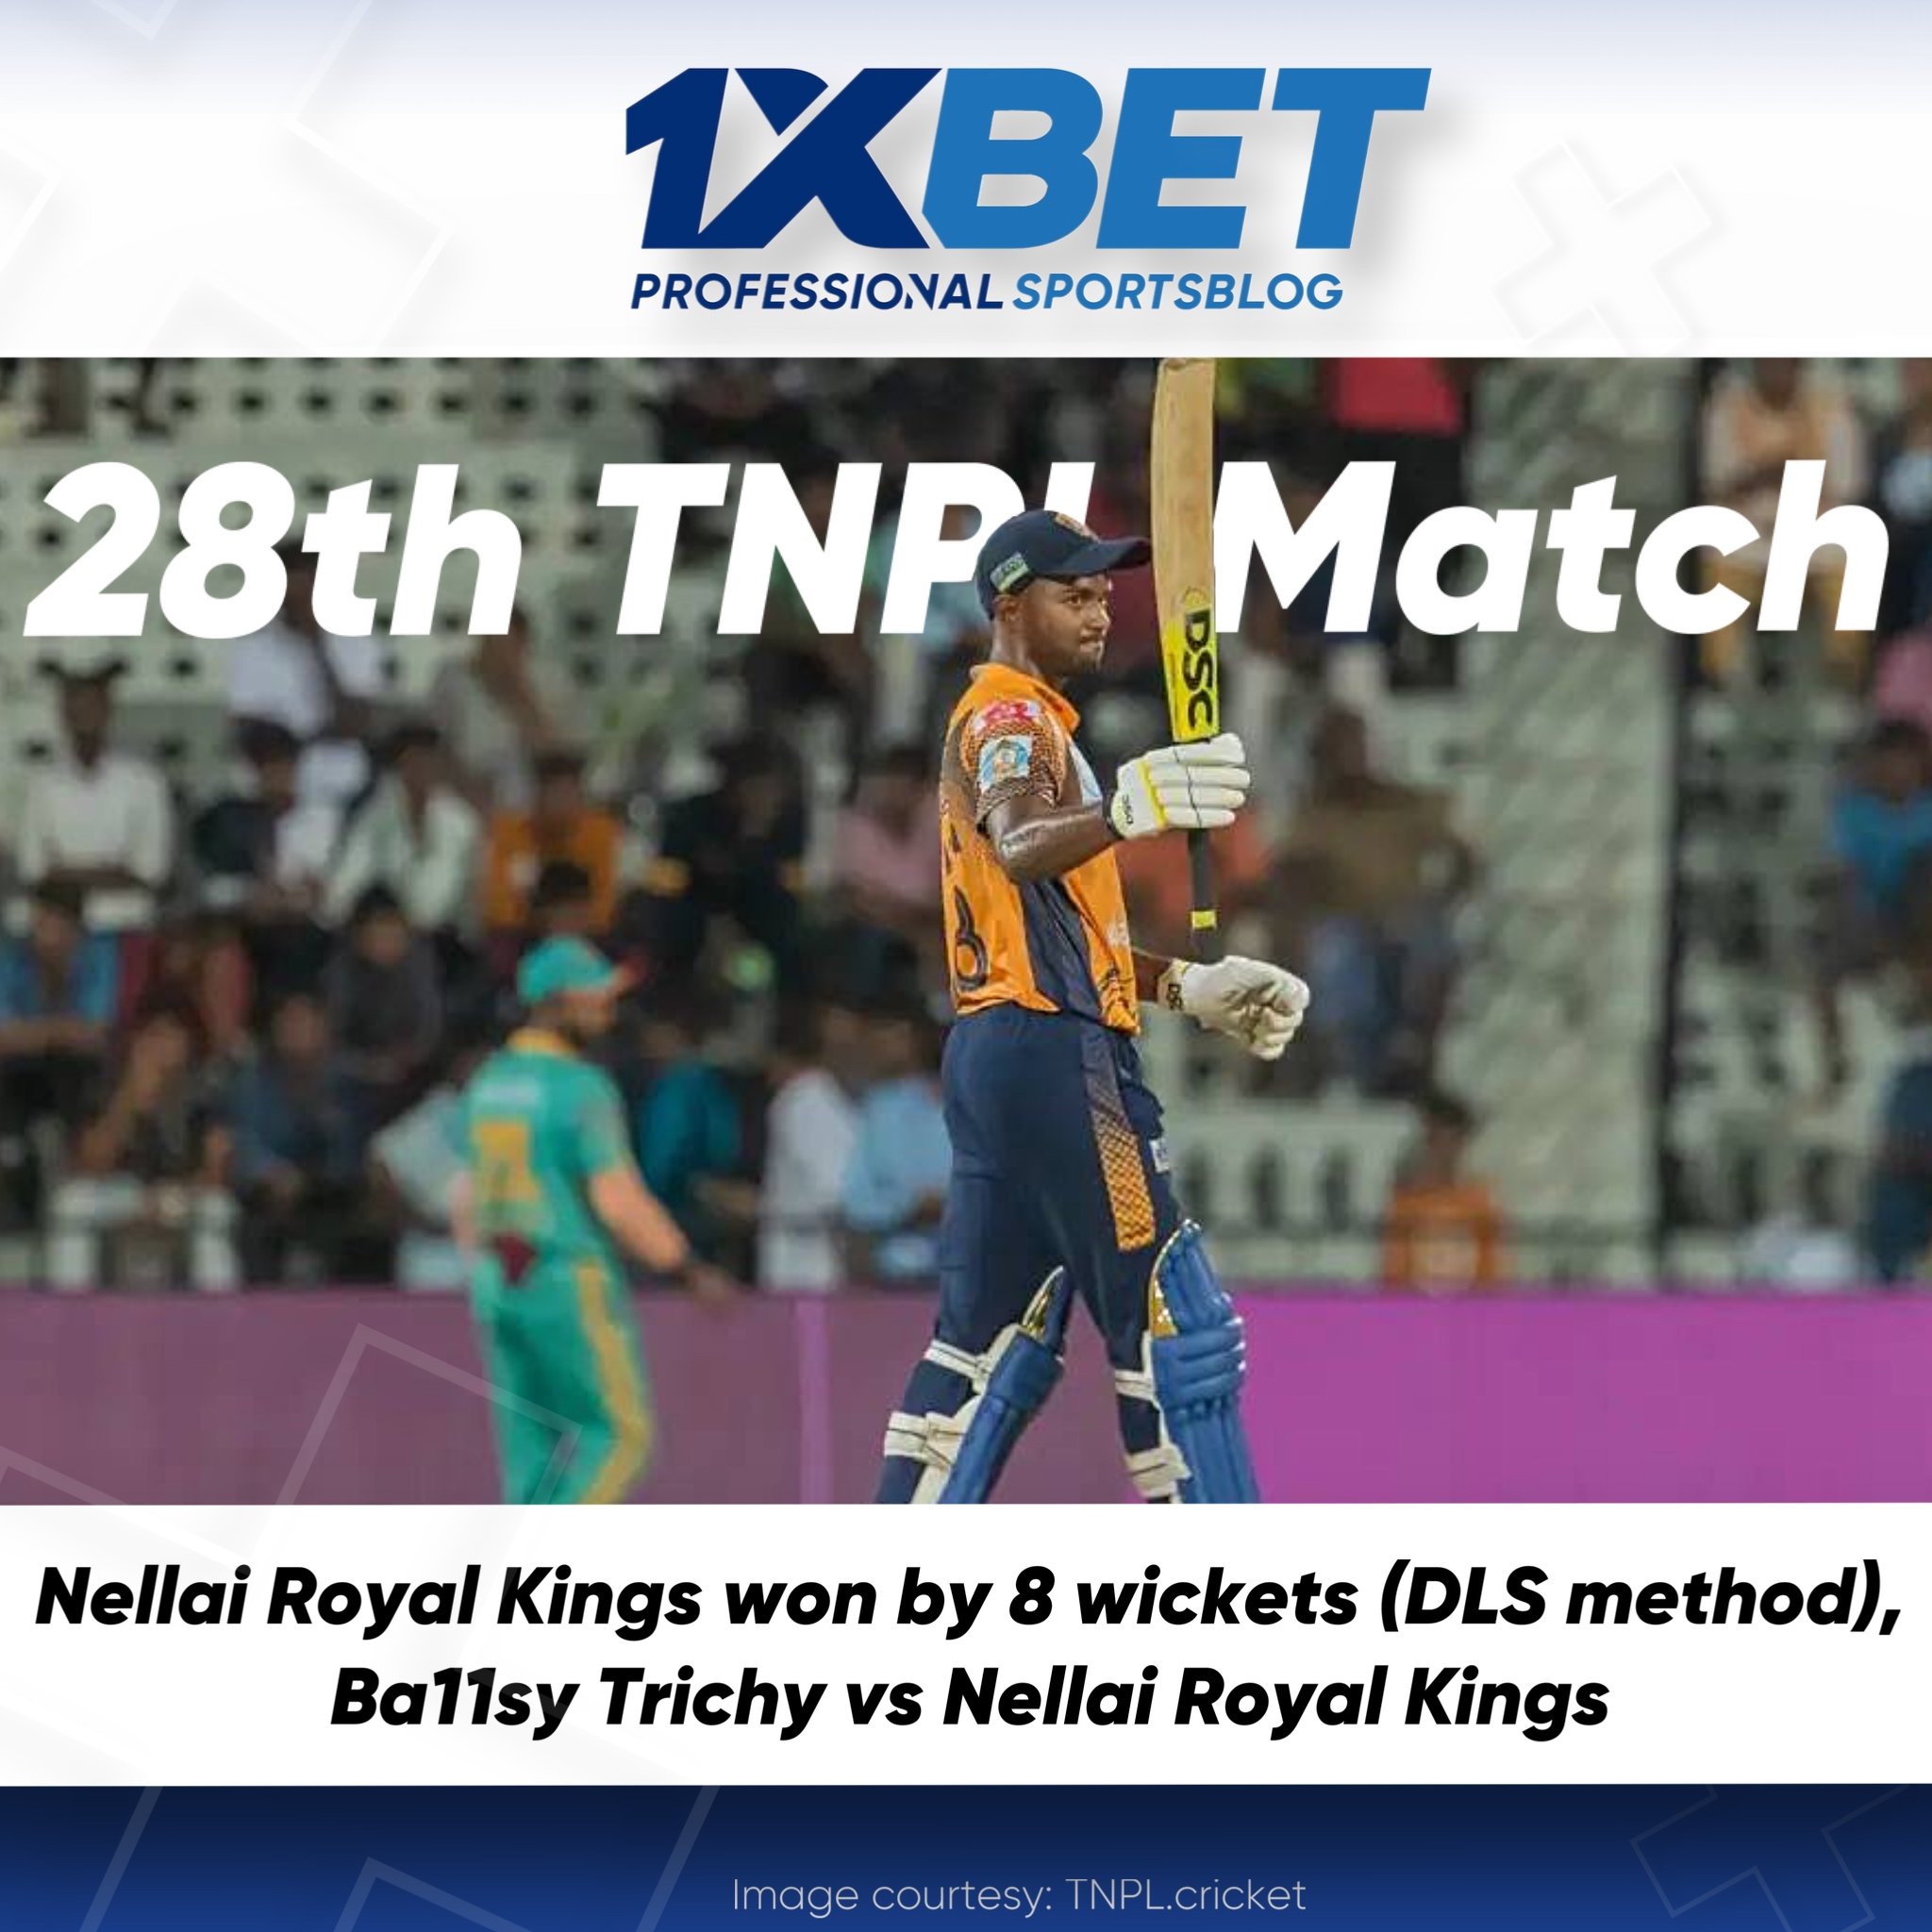 Nellai Royal Kings won by 8 wickets